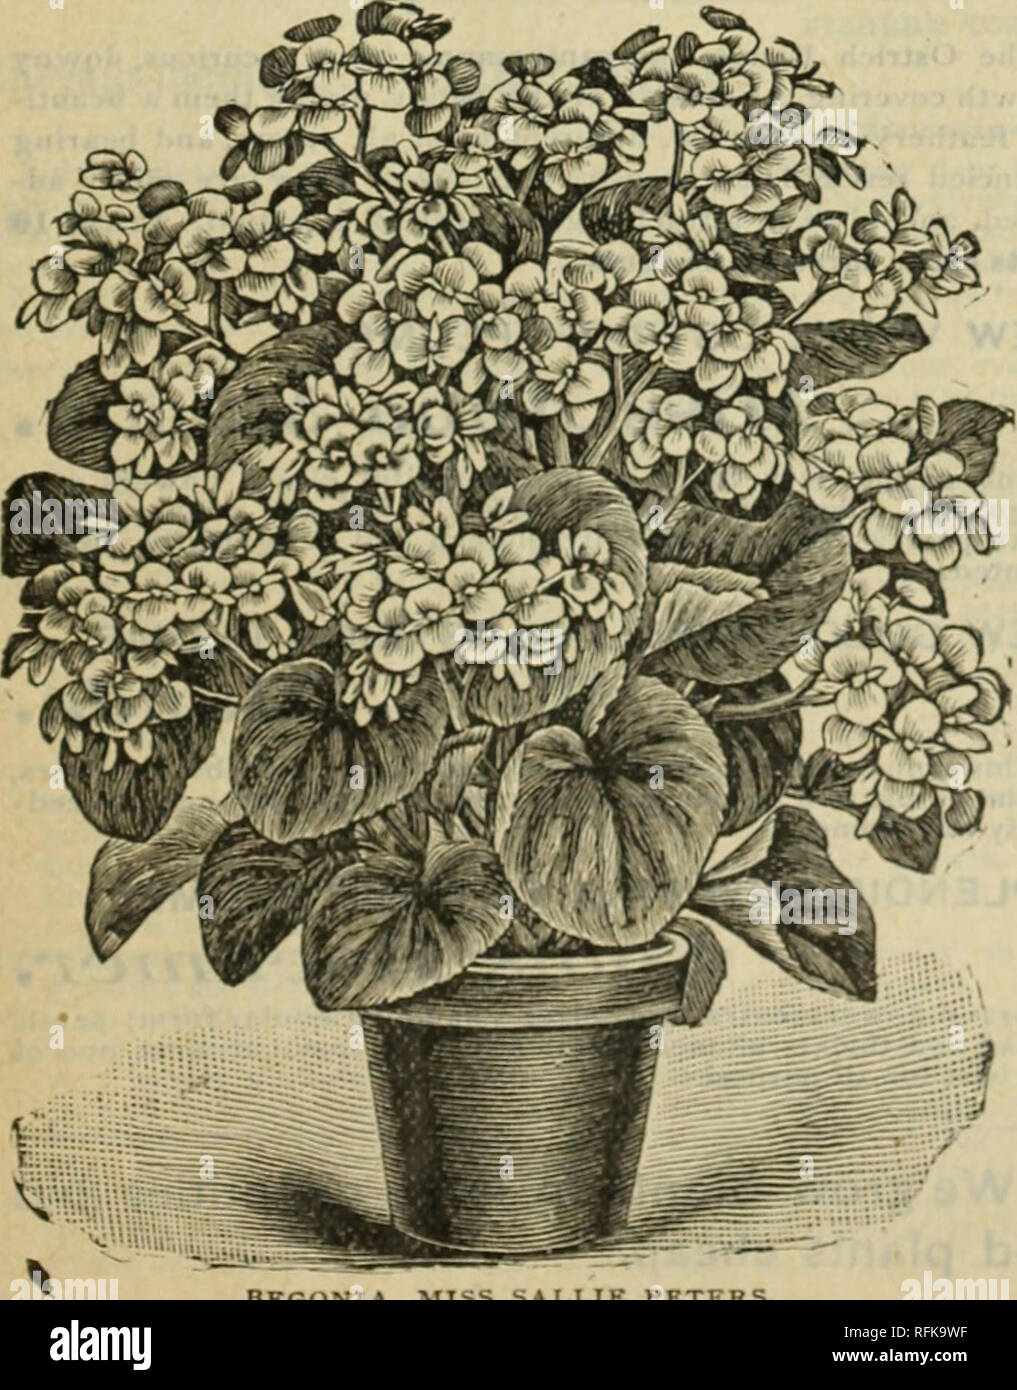 . Catalogue of plants, bulbs and seeds. Nursery stock Ohio Catalogs; Flowers Seeds Catalogs. BEGONIA, MISS SAI.LIE PETERB PAUL BKUANT. New Begonia, Argentea Guttata.—A cross between Olbia aud Al- bia Picta, This beautiful sort has the silvery blotches of Alba Picta and the grace and beauty of growth of Olbia. It has purple bronze leaves, oblong in shape, with silvery markings. It produces white flowers in bunches on ends of growth stems. Price, 10c each. Begonia Feastii.—A low. spreading Begonia, with perfect circular leaves, red beneath and dark, glossy-green above, and of heavy texture. Pric Stock Photo